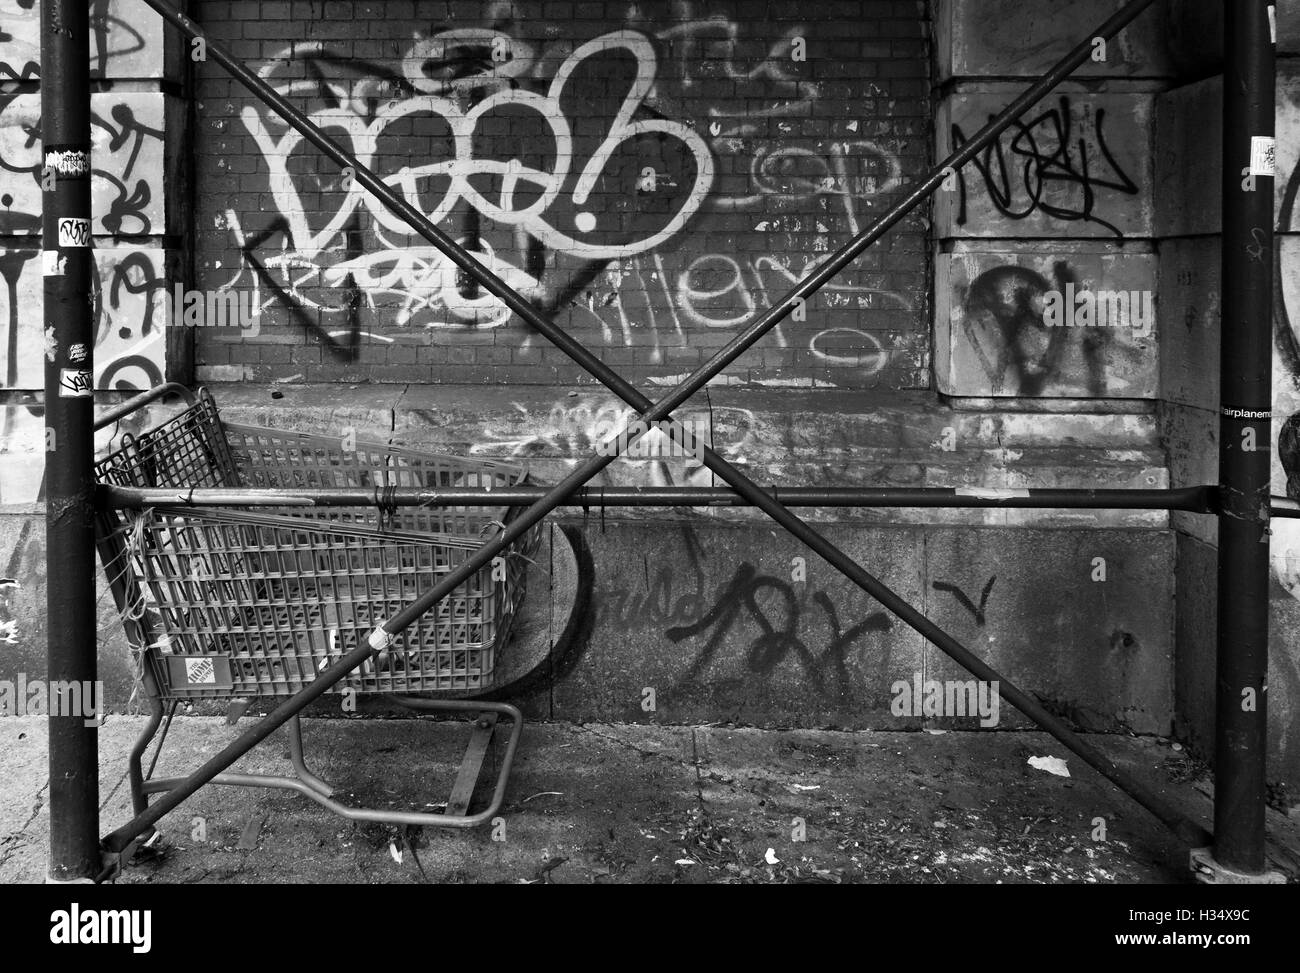 Monochrome gritty image of scaffolding crossed poles with abandoned shopping trolley and a graffiti covered wall in New York Stock Photo